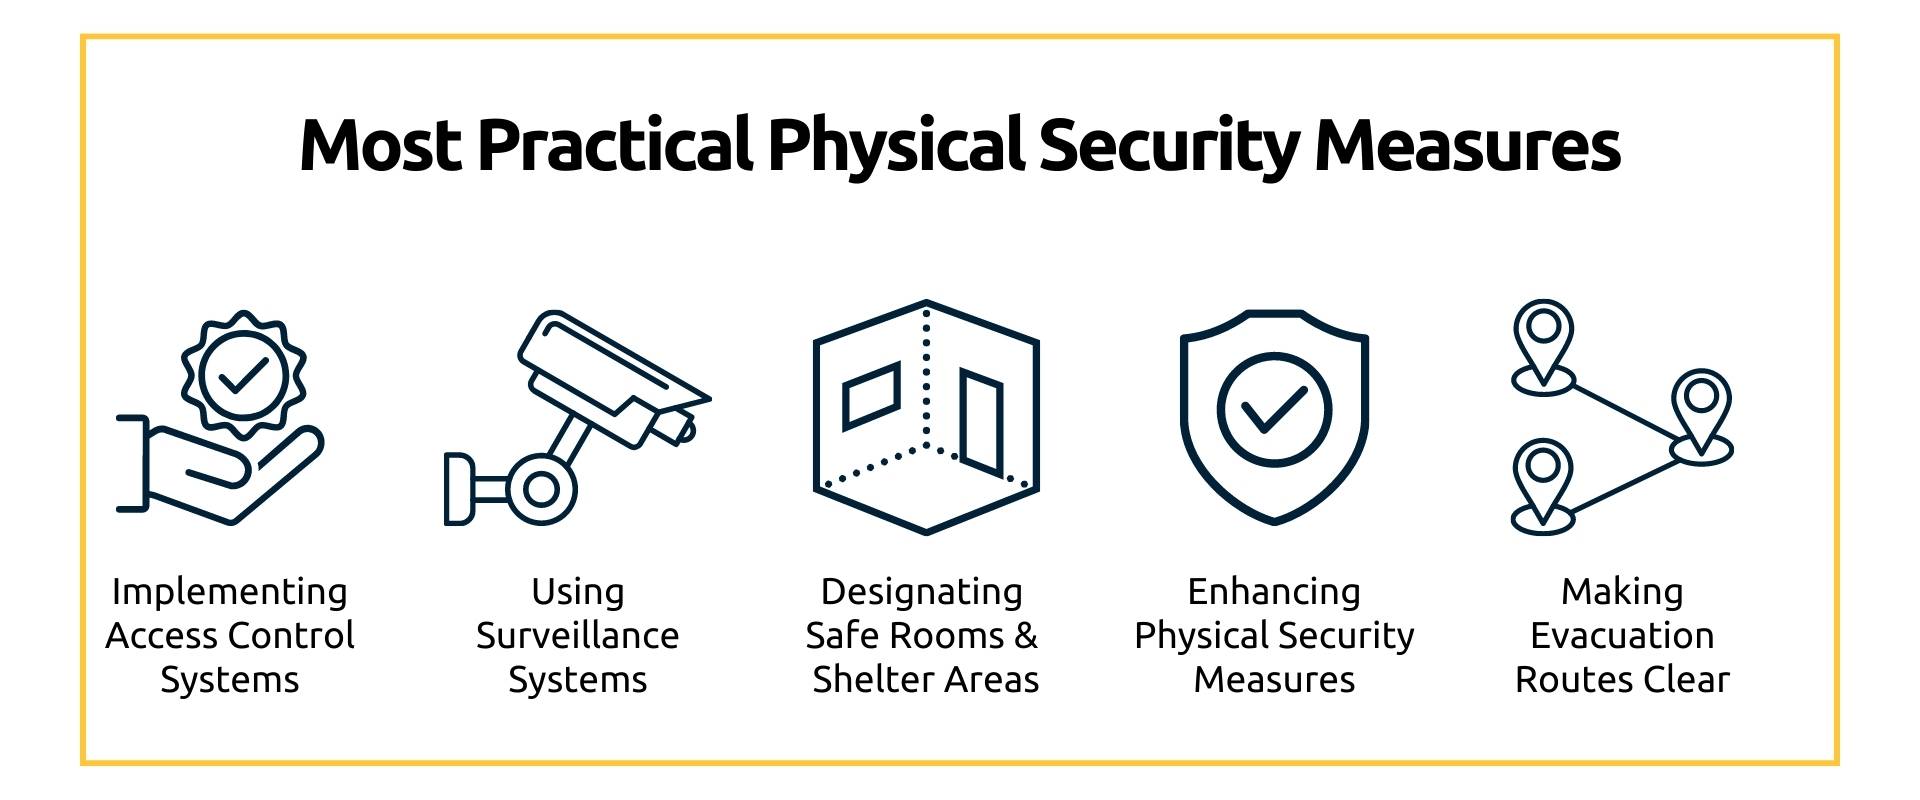 Enhance Physical Security Measures